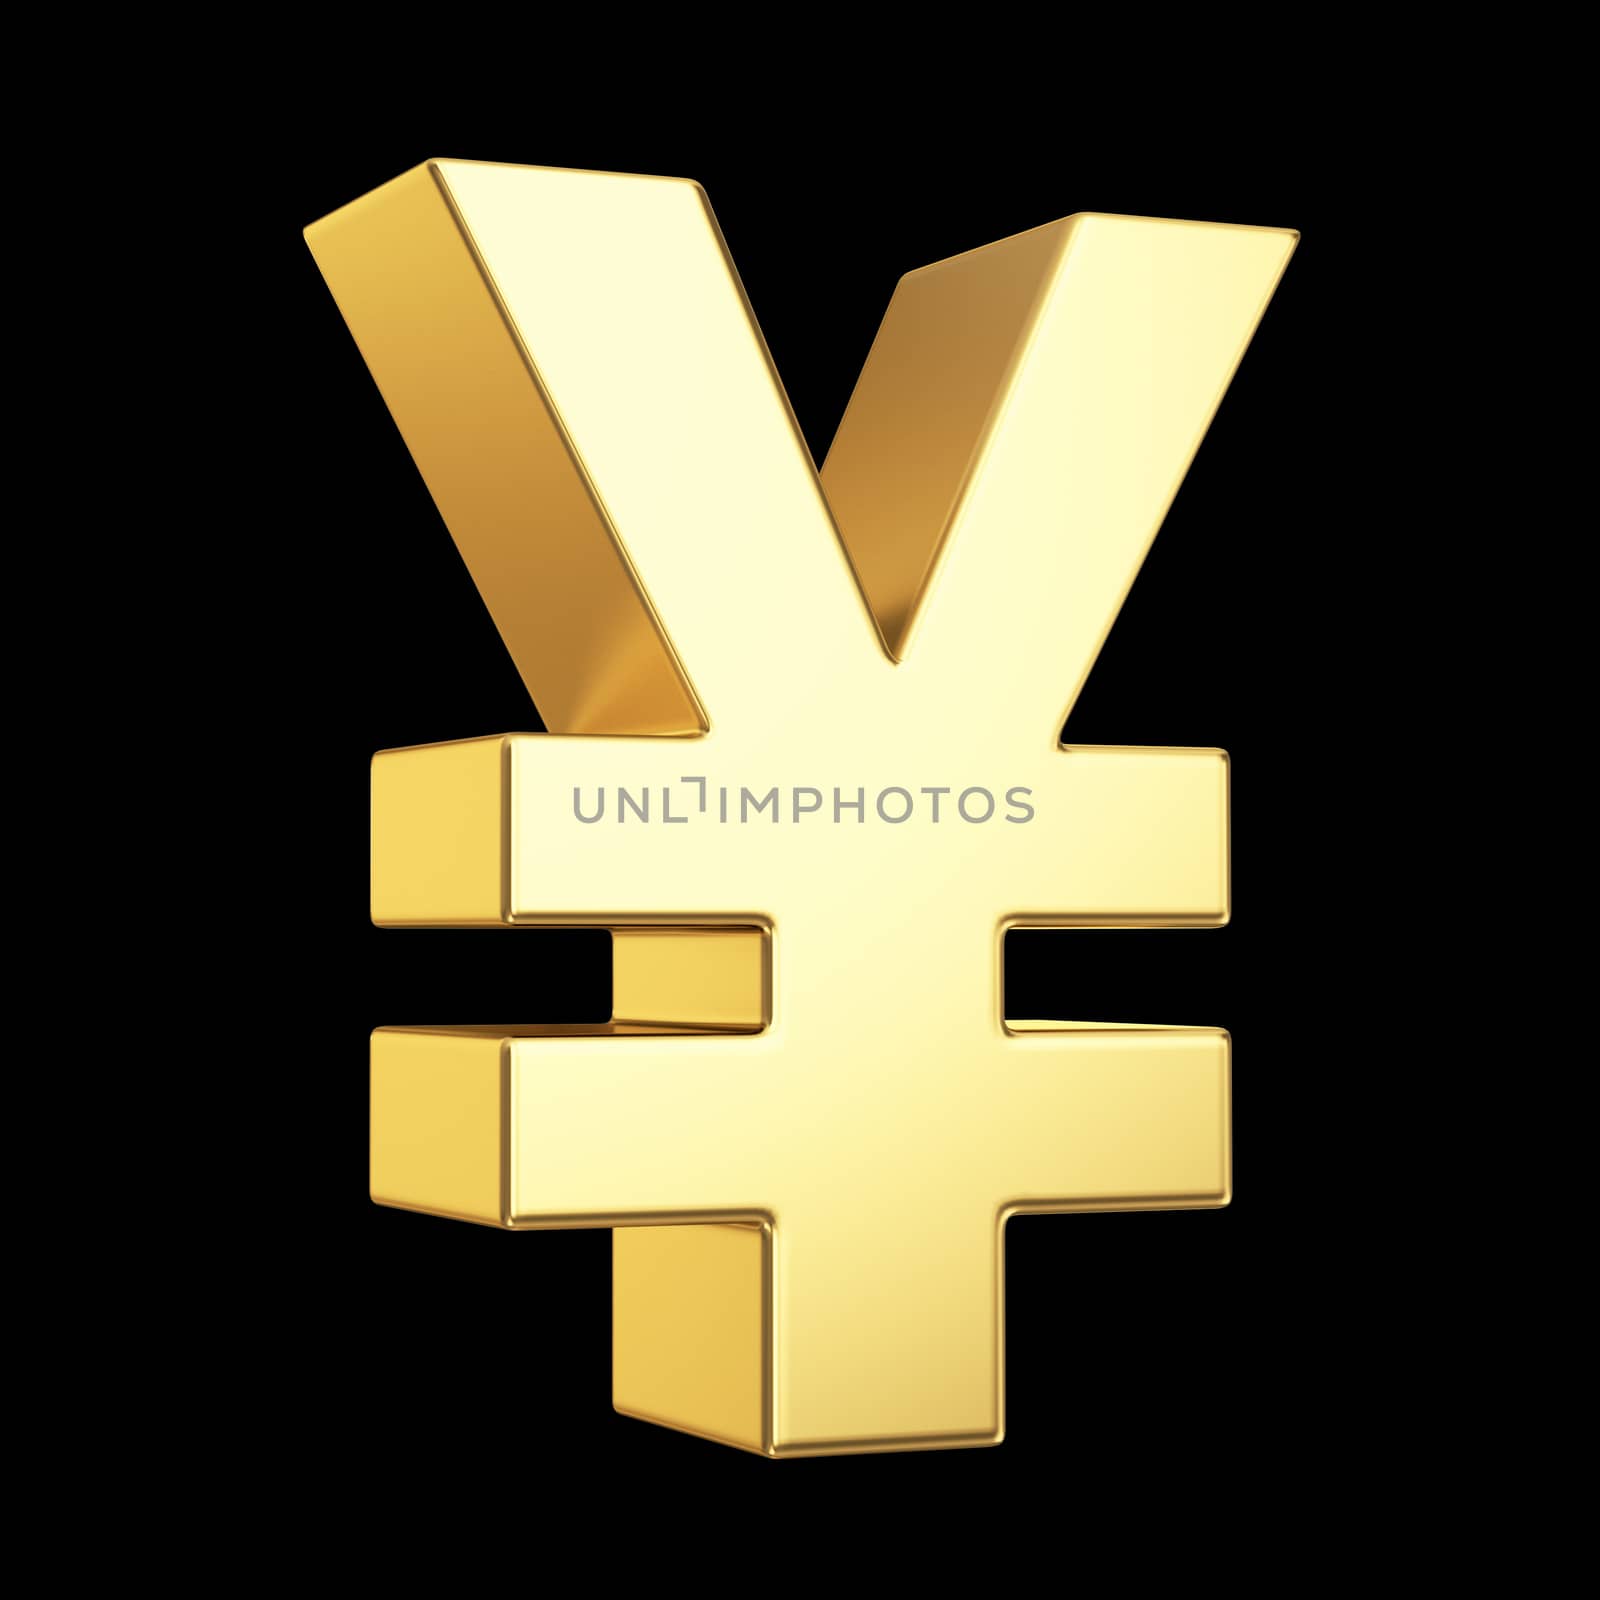 Golden yen currency symbol - clipping path by 123dartist